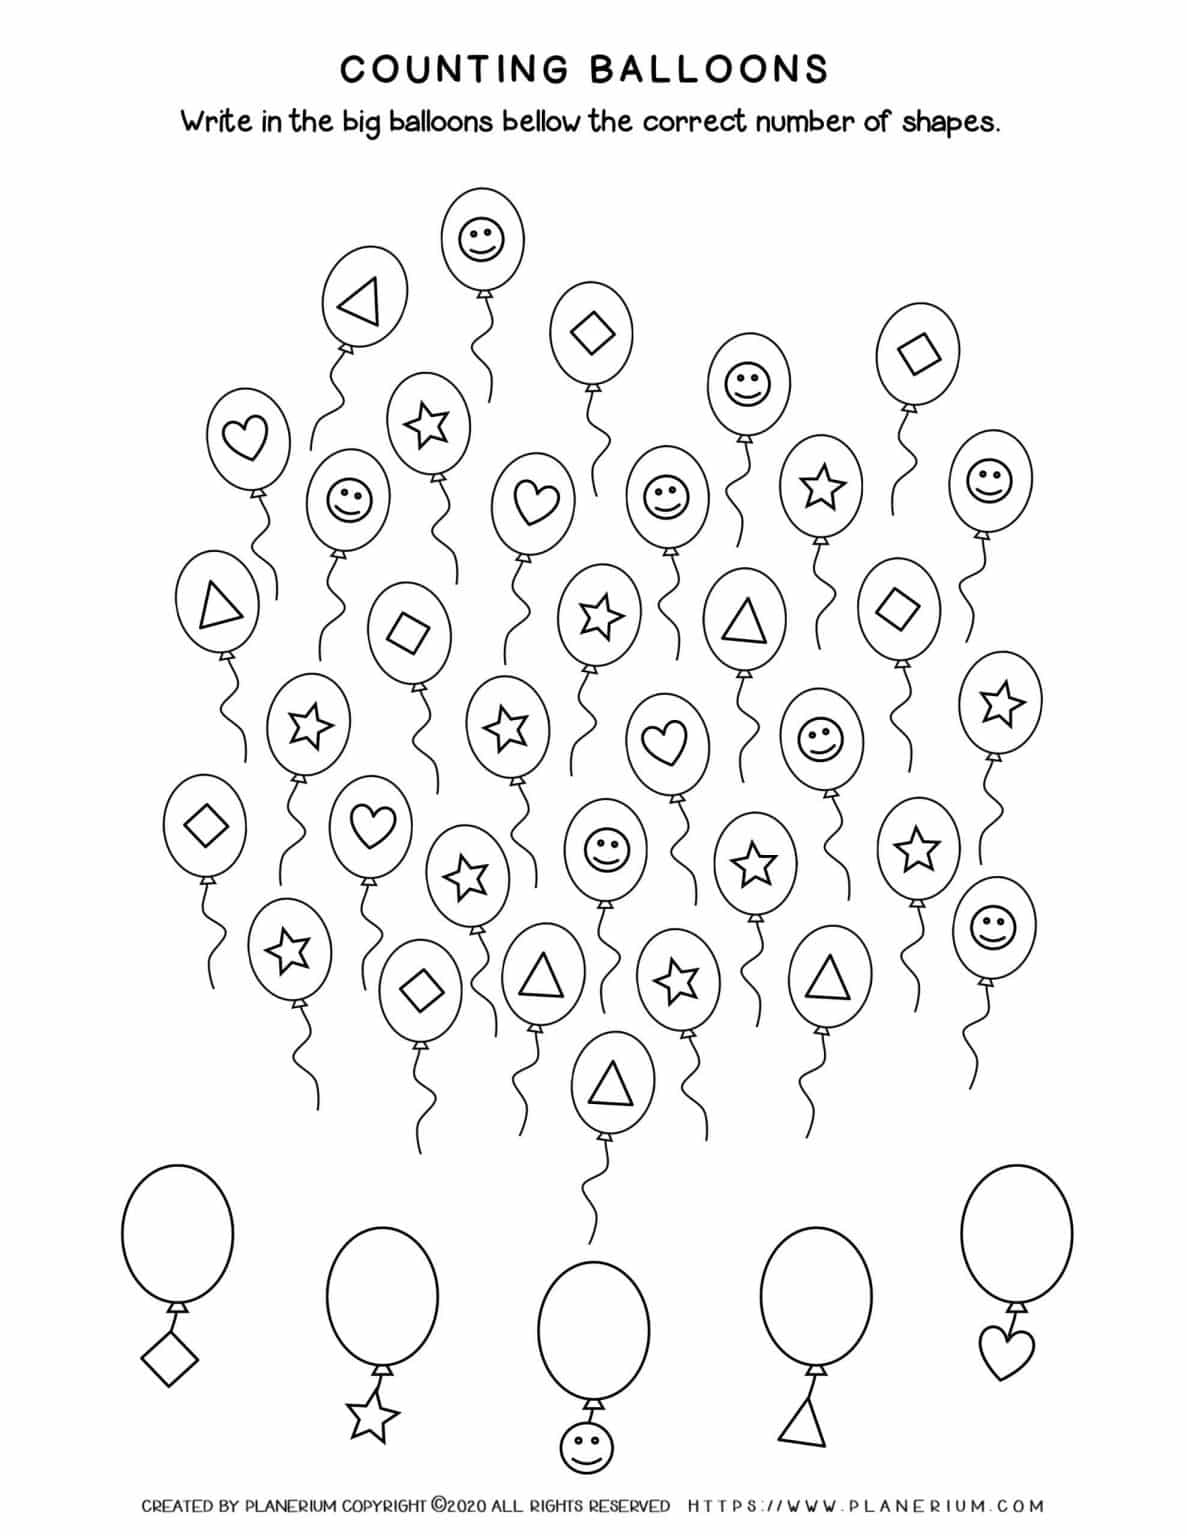 Math Worksheet for 1st grade - Sort and Count shapes in balloons